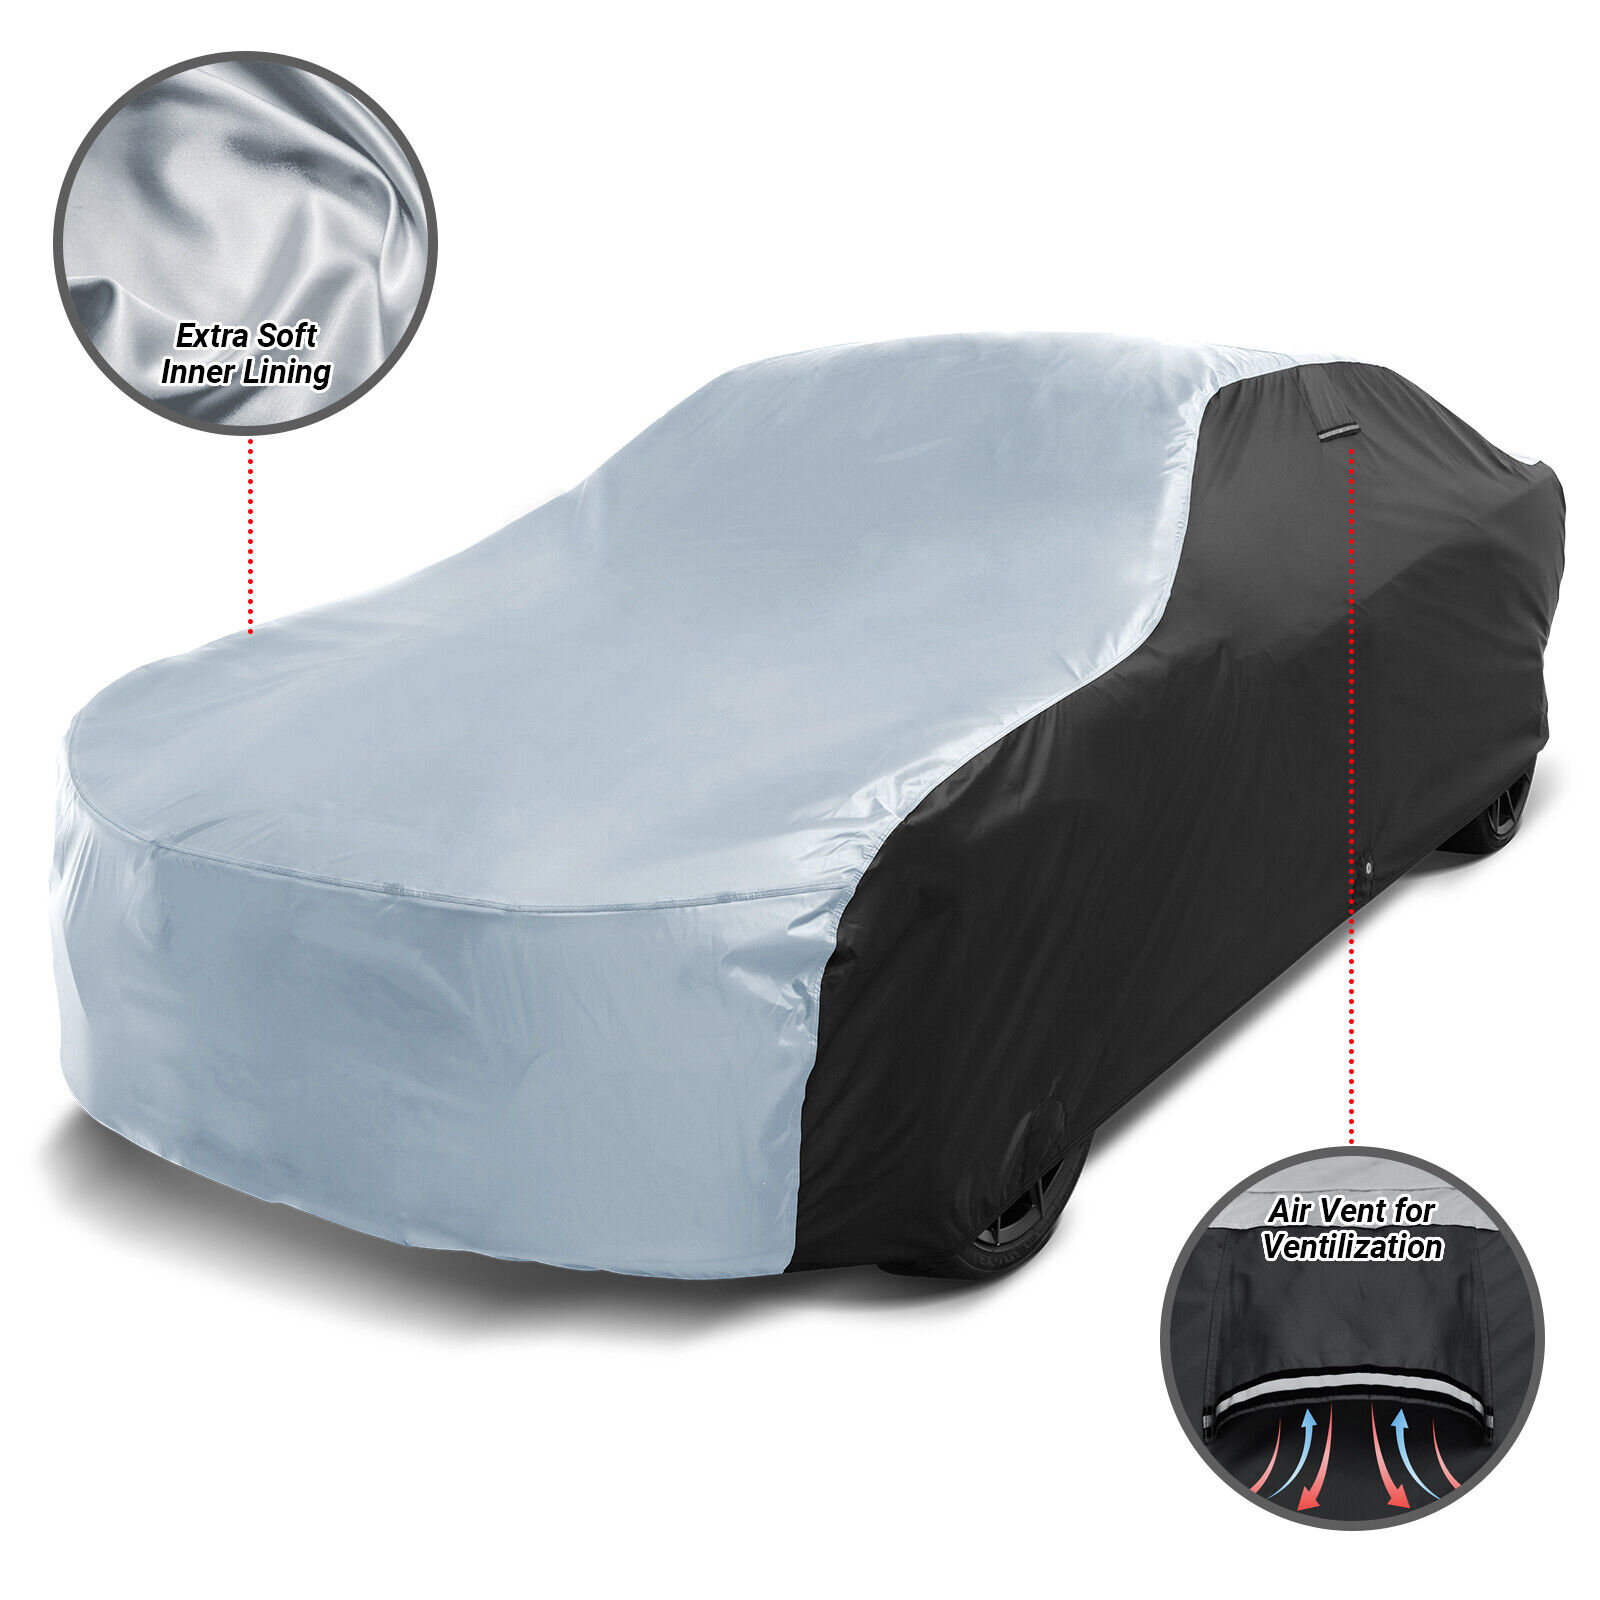 For PONTIAC [SOLSTICE] Custom-Fit Outdoor Waterproof All Weather Cover